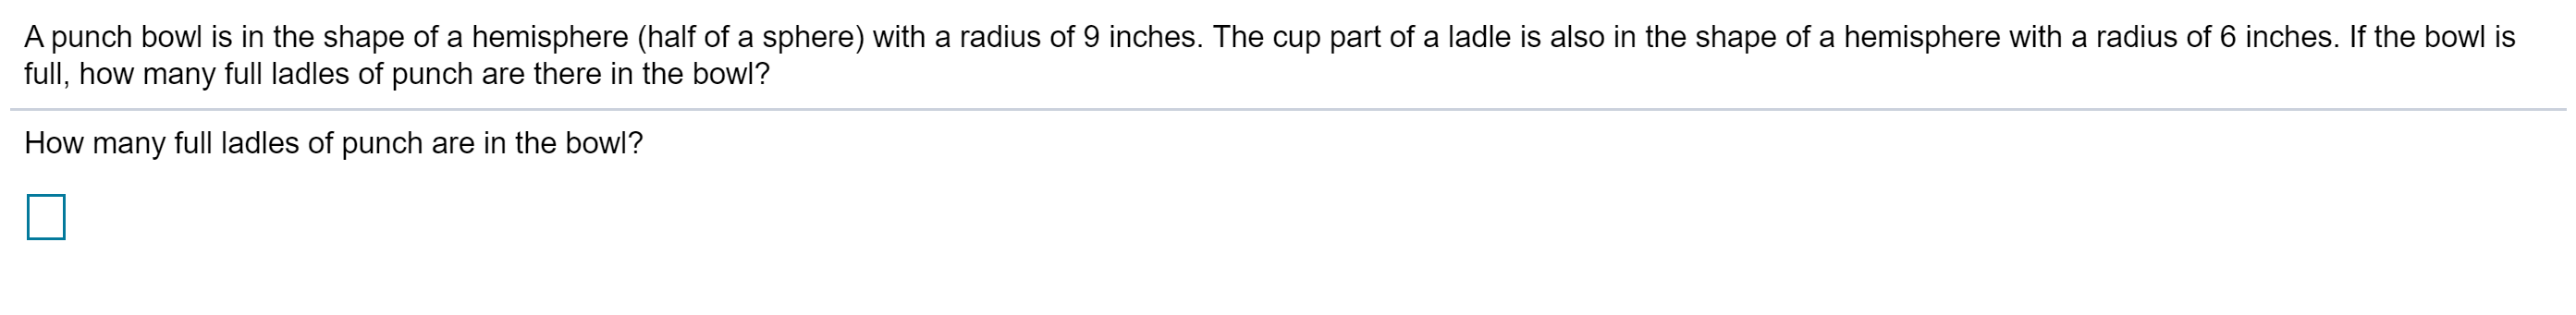 A punch bowl is in the shape of a hemisphere (half of a sphere) with a radius of 9 inches. The cup part of a ladle is also in the shape of a hemisphere with a radius of 6 inches. If the bowl is
full, how many full ladles of punch are there in the bowl?
How many full ladles of punch are in the bowl?
